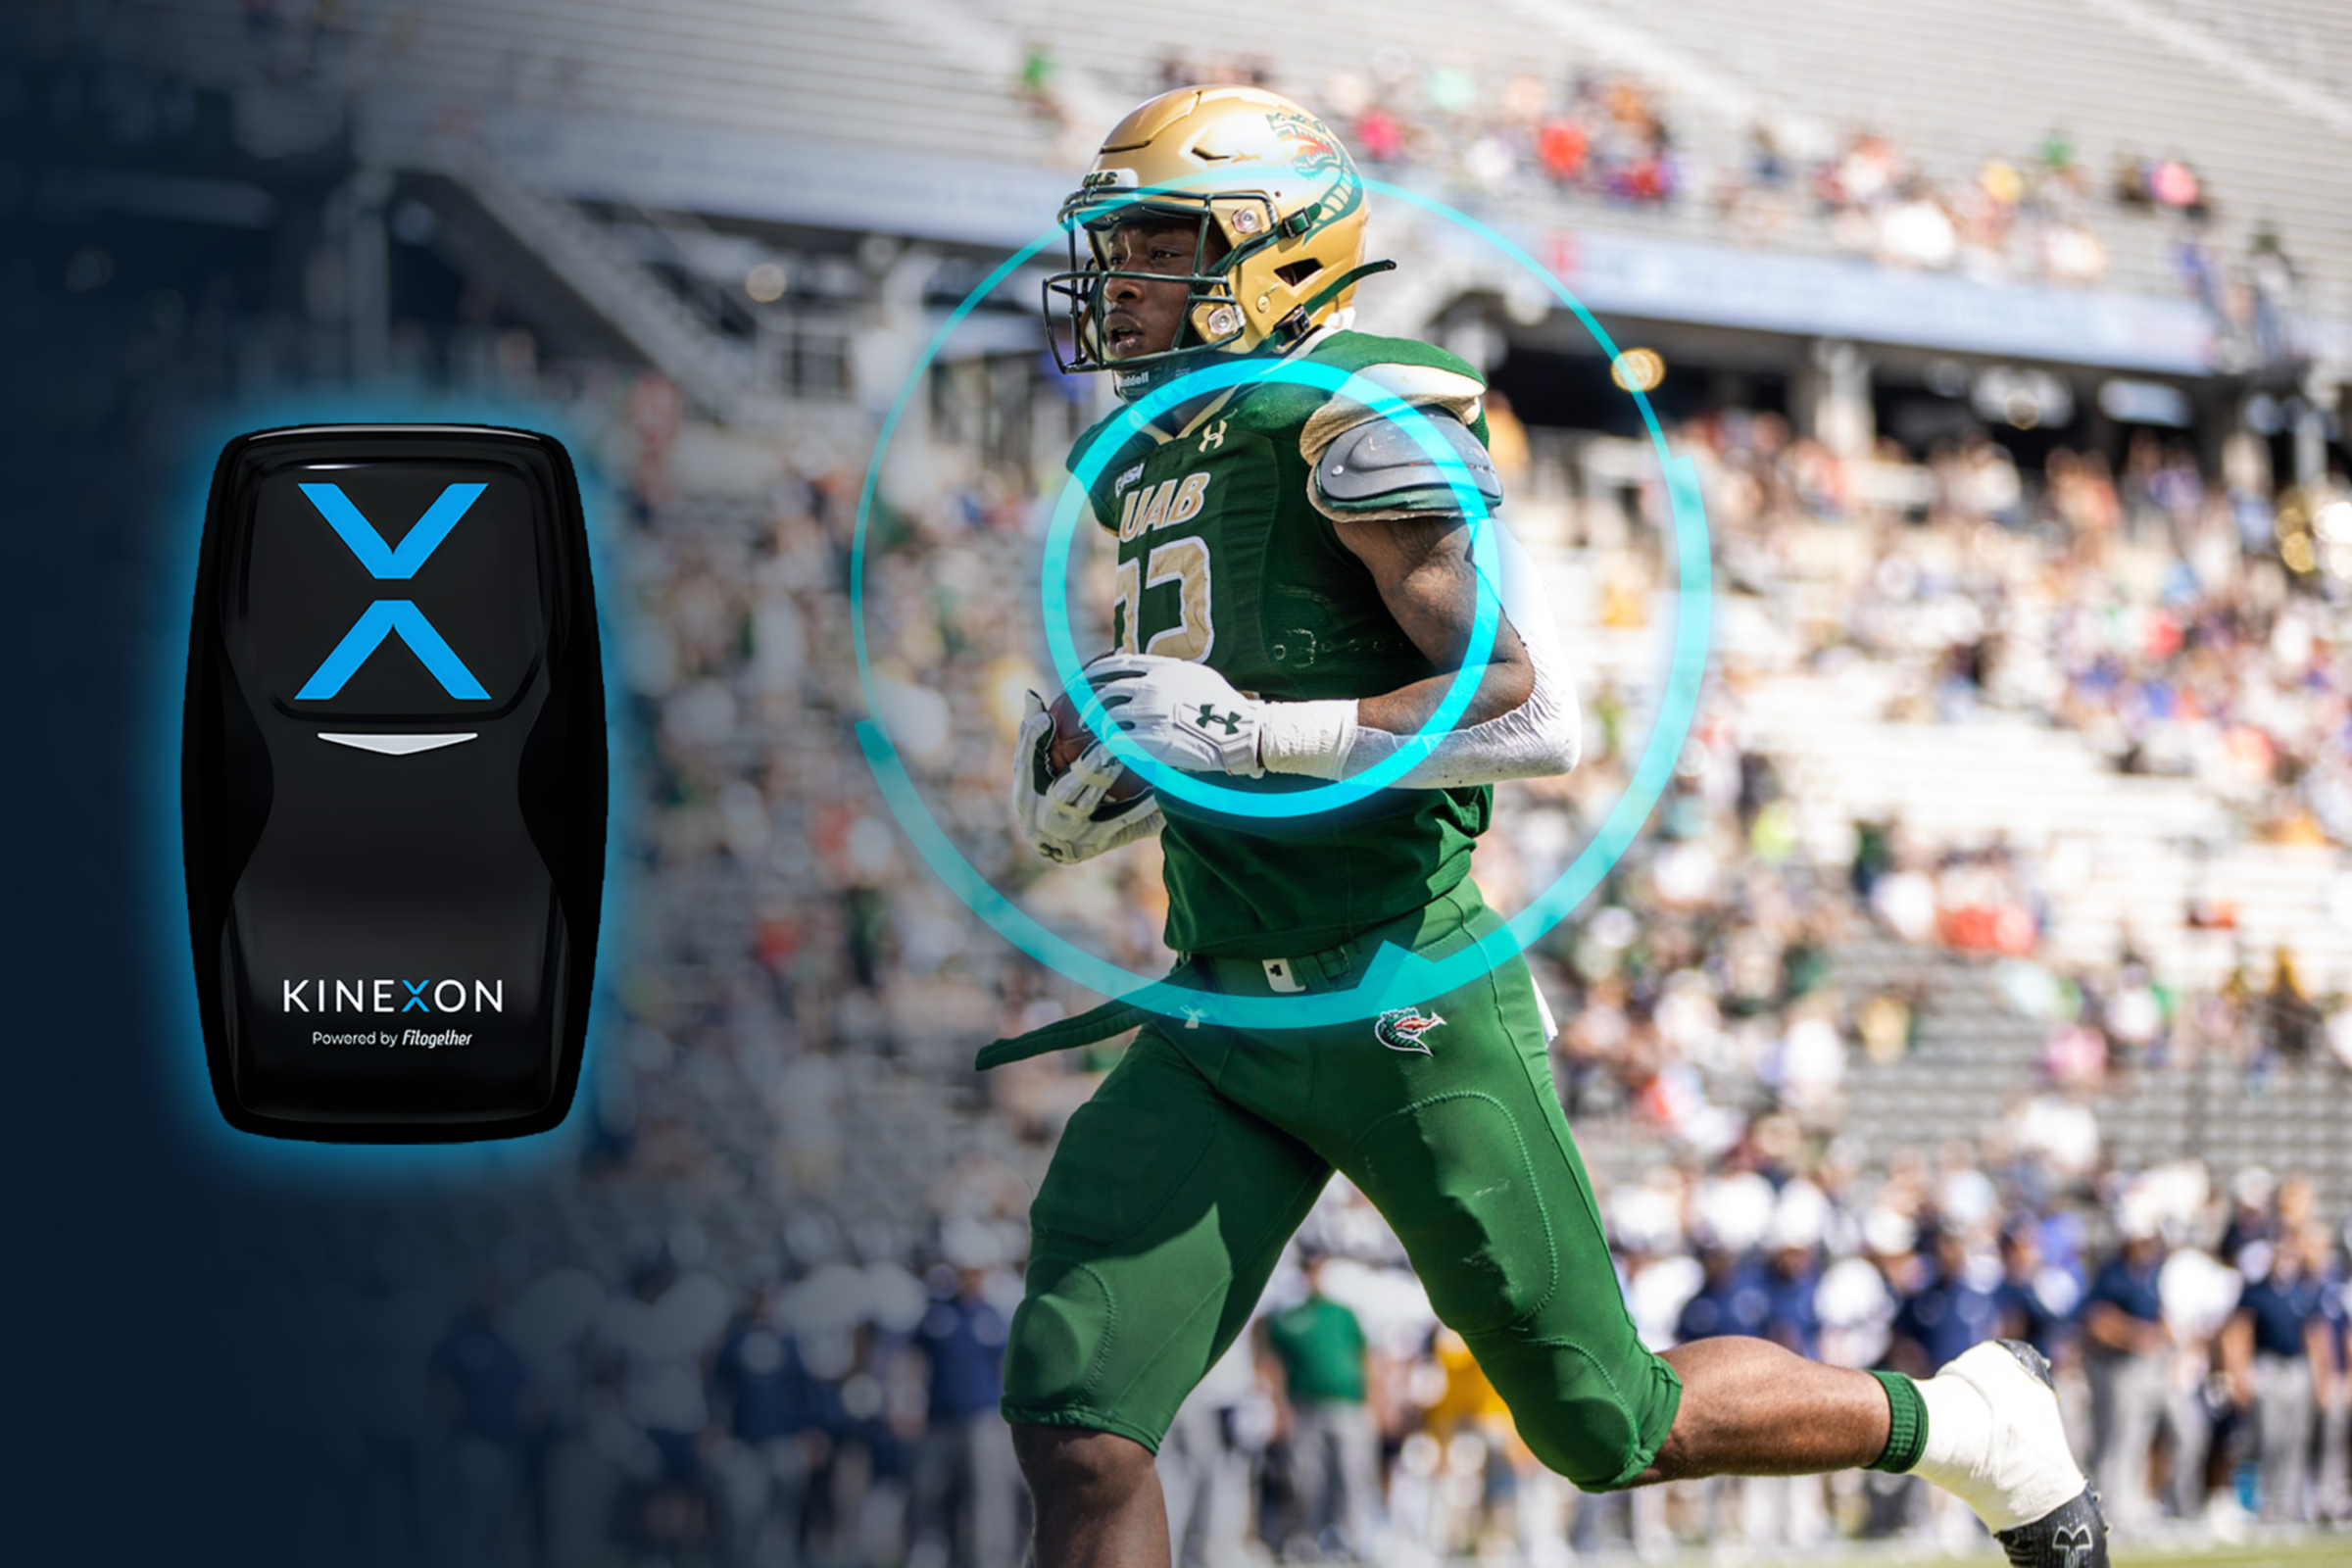 This is a montage of a football player with the KINEXON Sensor and overlay.